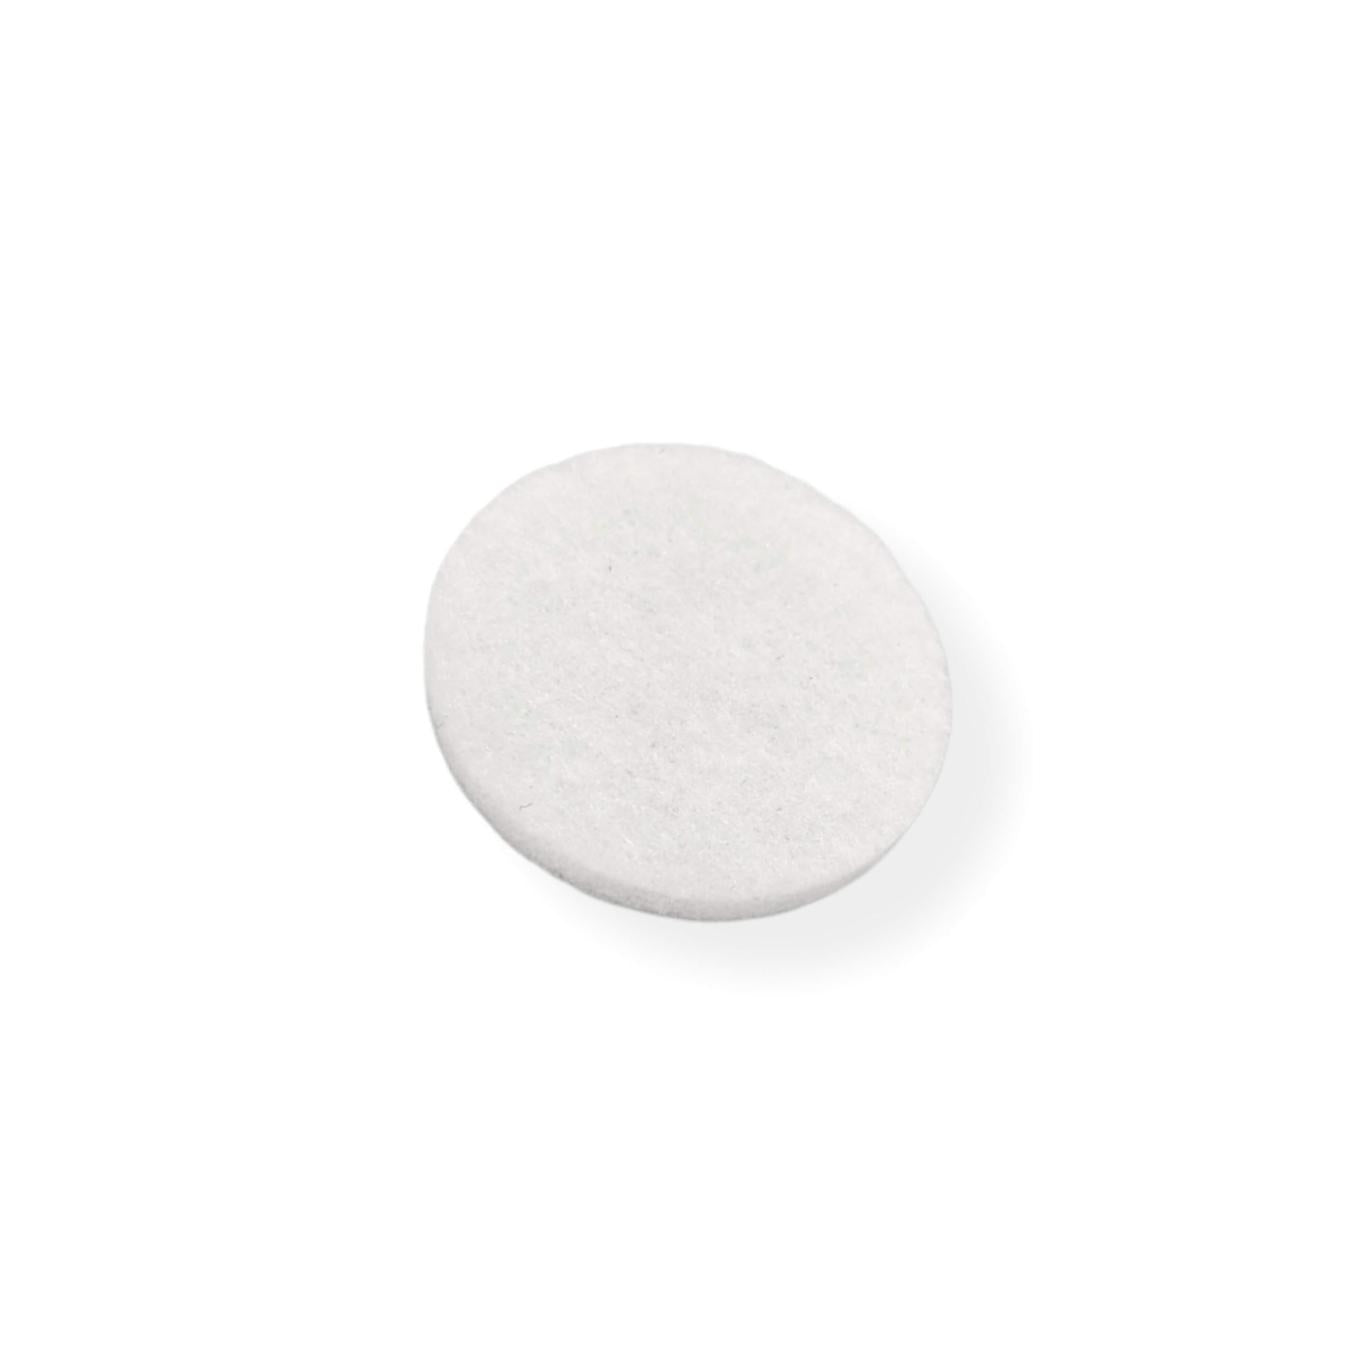 Felt Pads - White Self Adhesive Stick on Felt - Round 28mm Diameter - Made in Germany - Keay Vital Parts